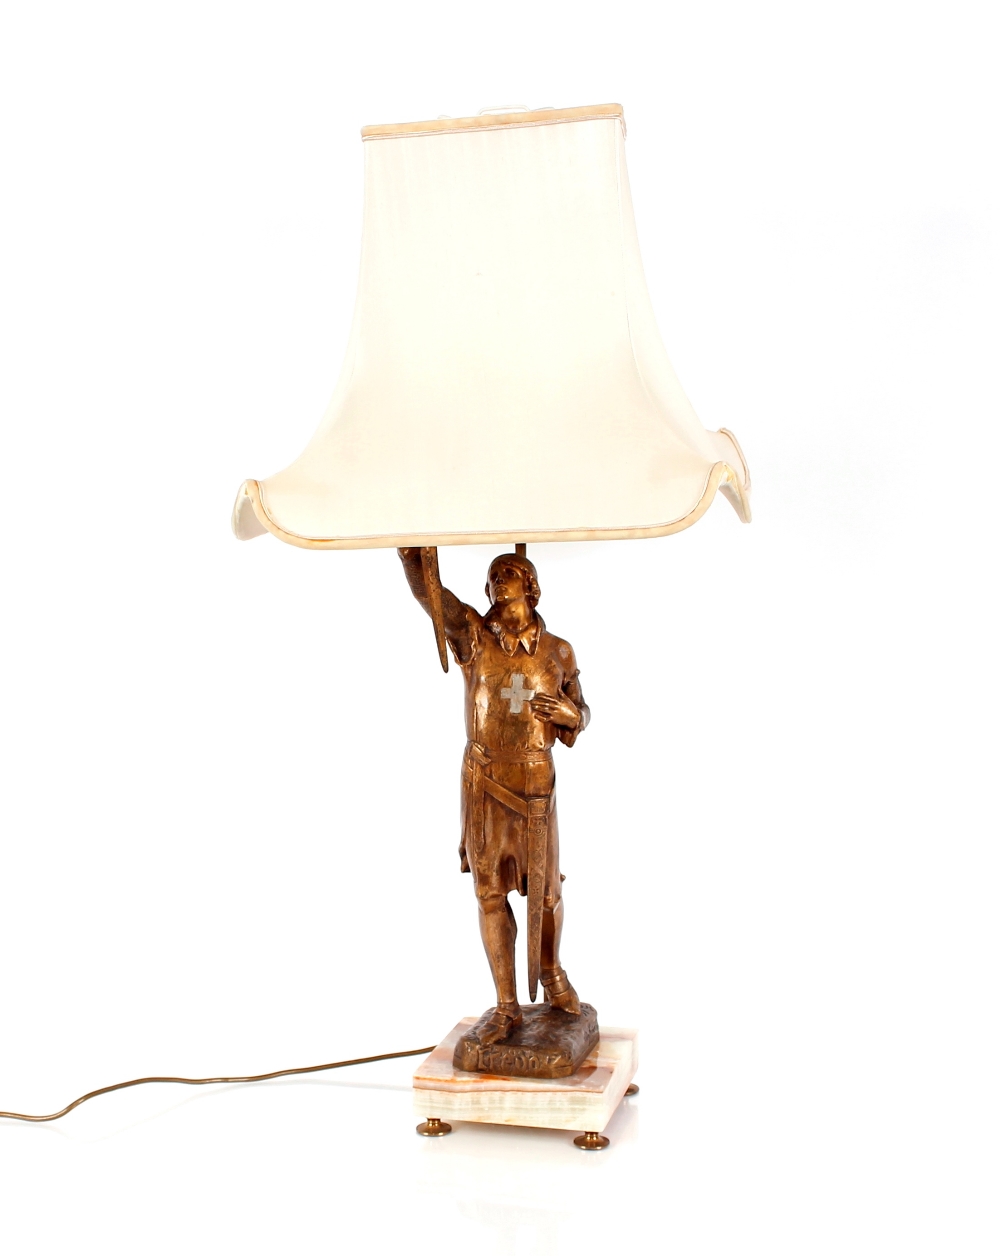 A bronze Joan of Arc lamp, signed J. Monier, complete with silk shade, 95cm high overall, originally - Image 2 of 4